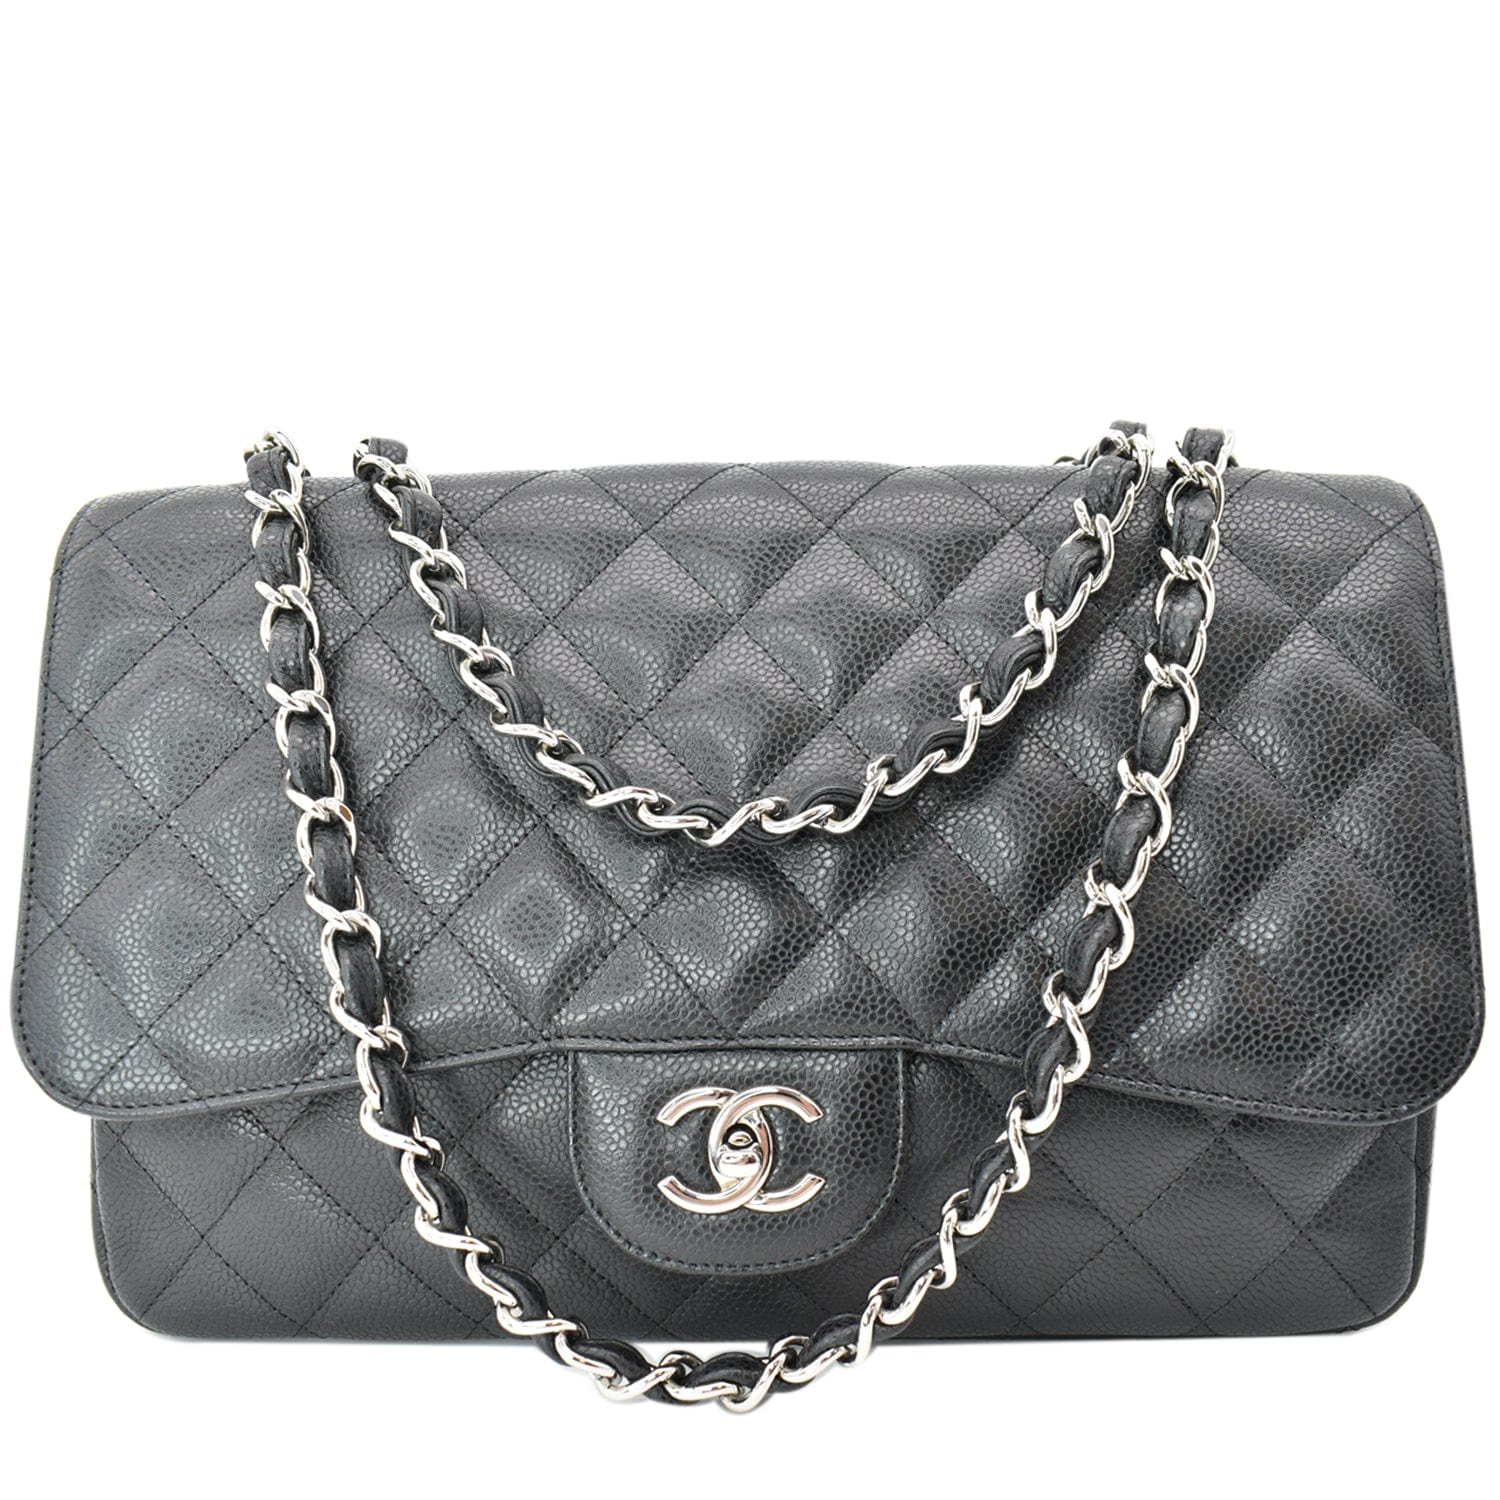 How To Distinguish Between an Original Chanel Handbag and a Fake, Repl –  LuxCollector Vintage